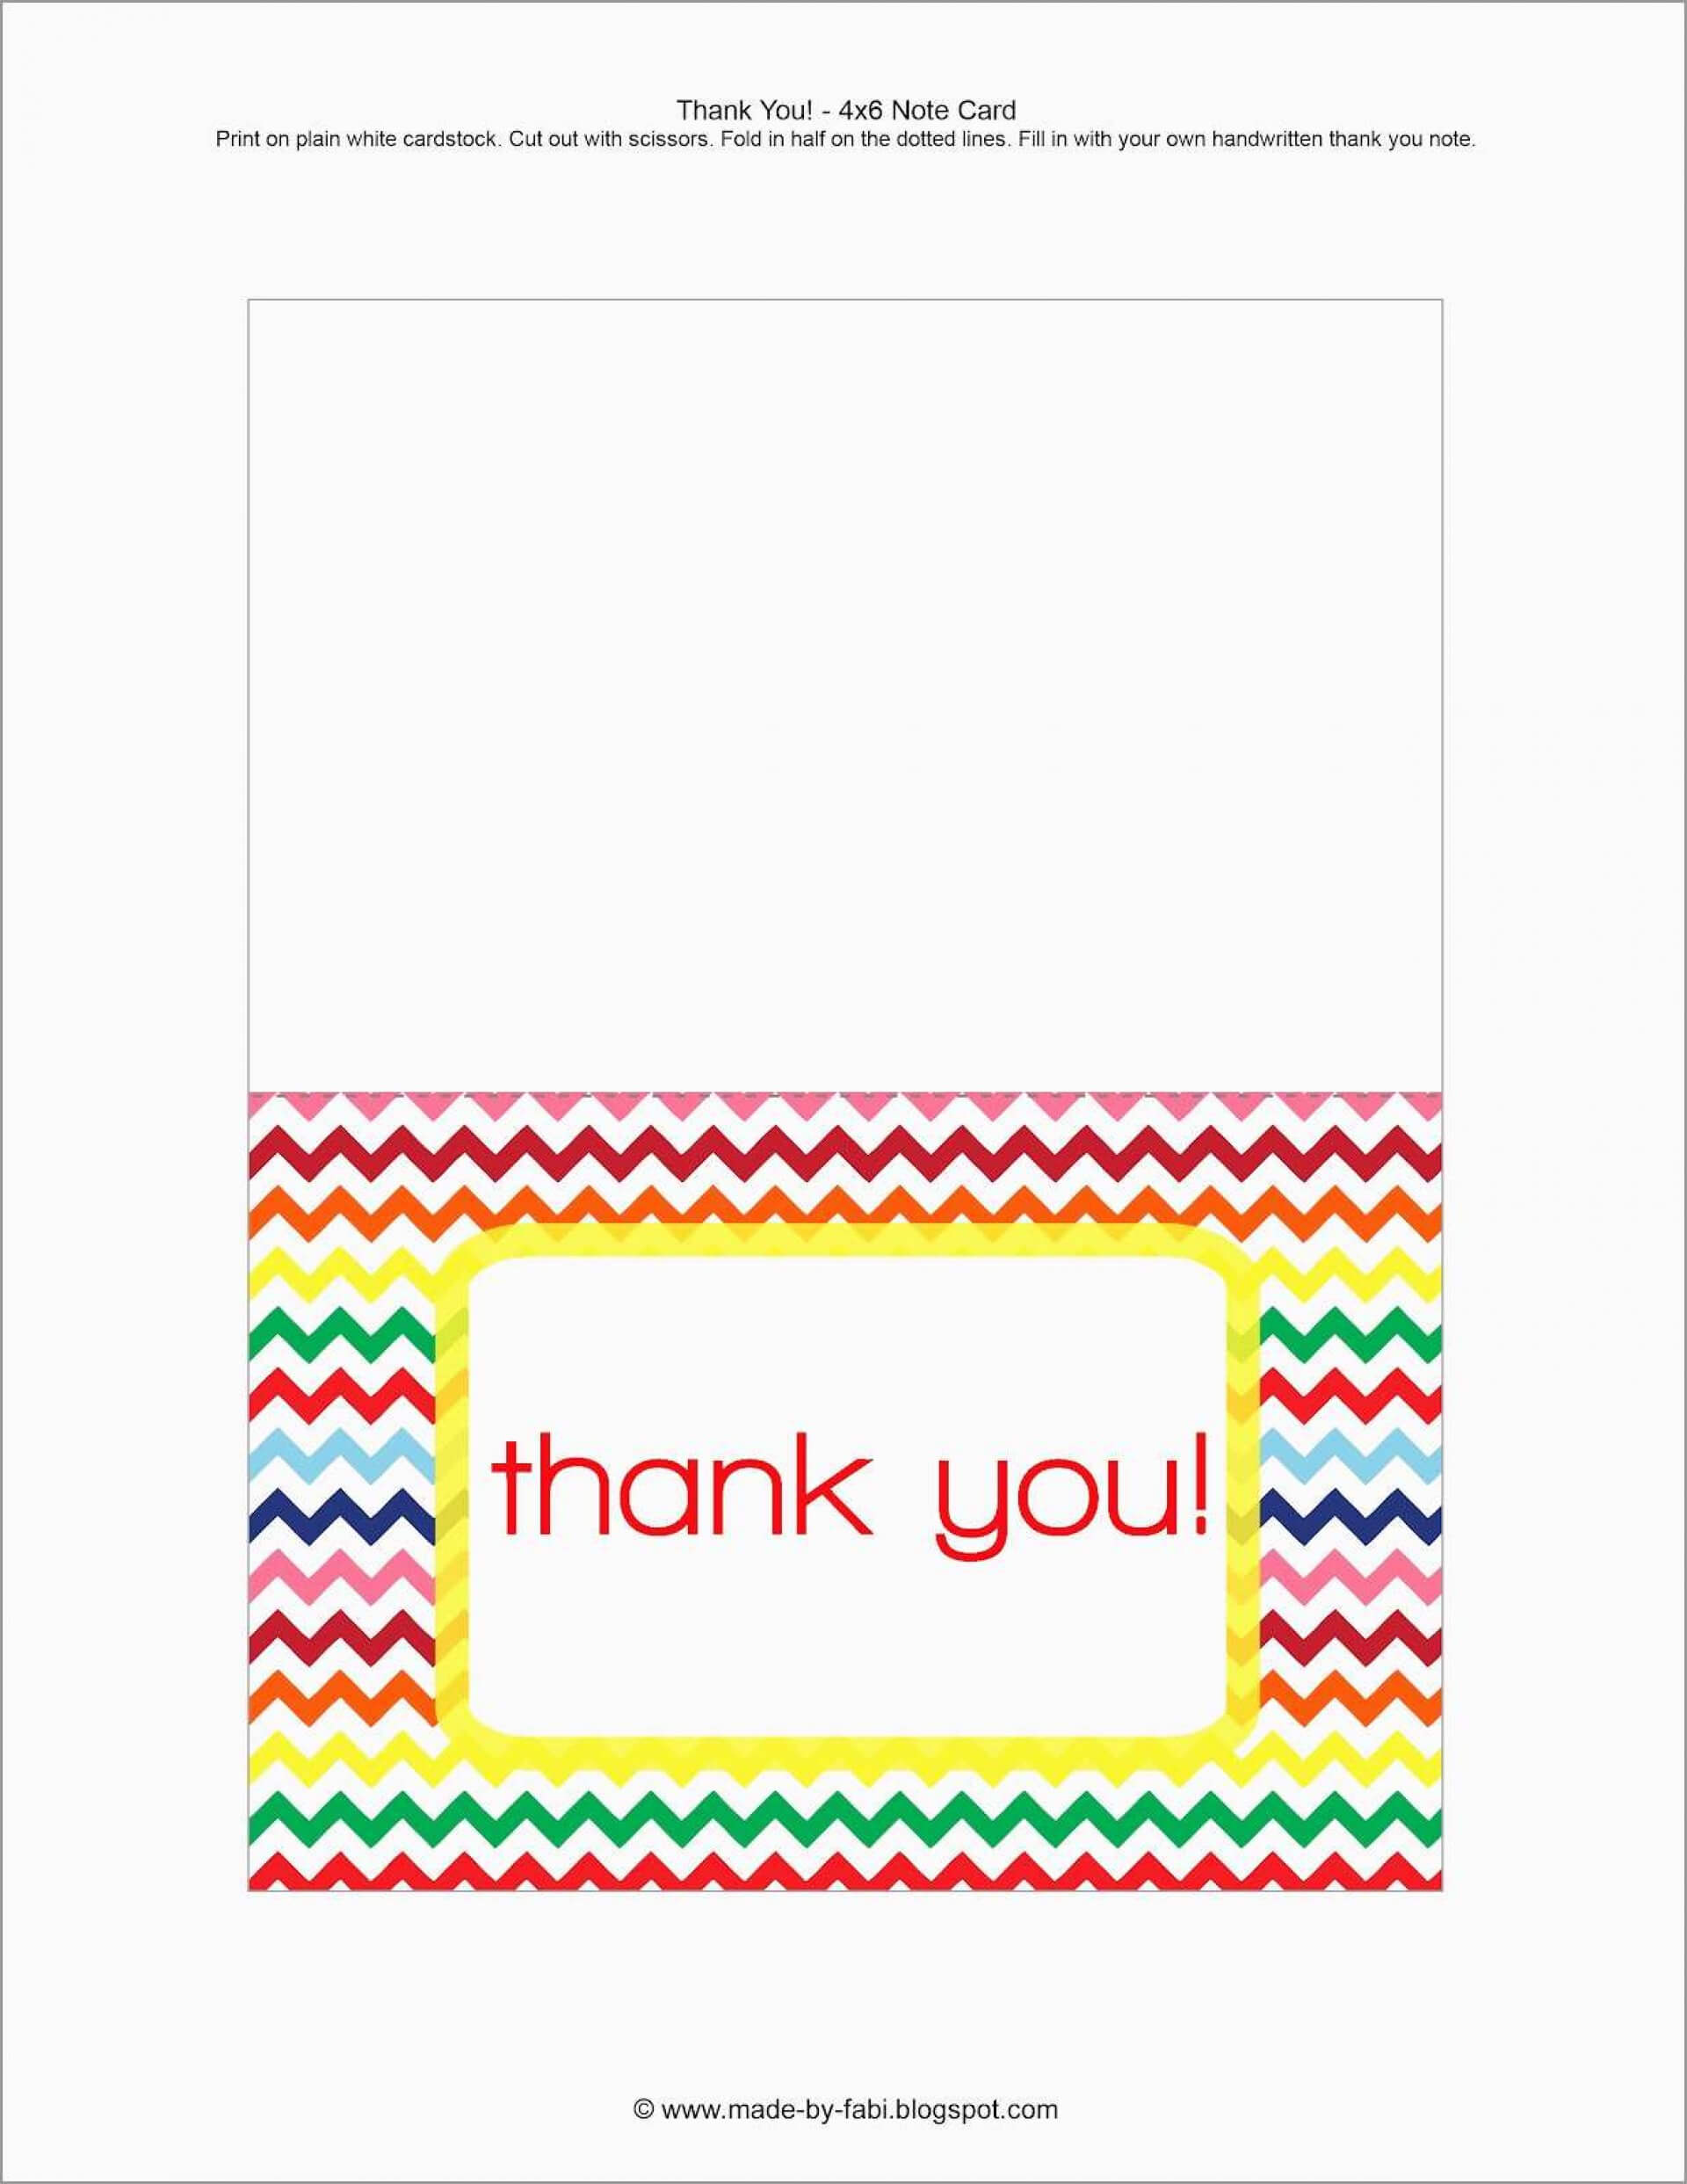 034 Screen Shot At Am 793X1024 Template Ideas Free Printable Pertaining To Thank You Note Cards Template